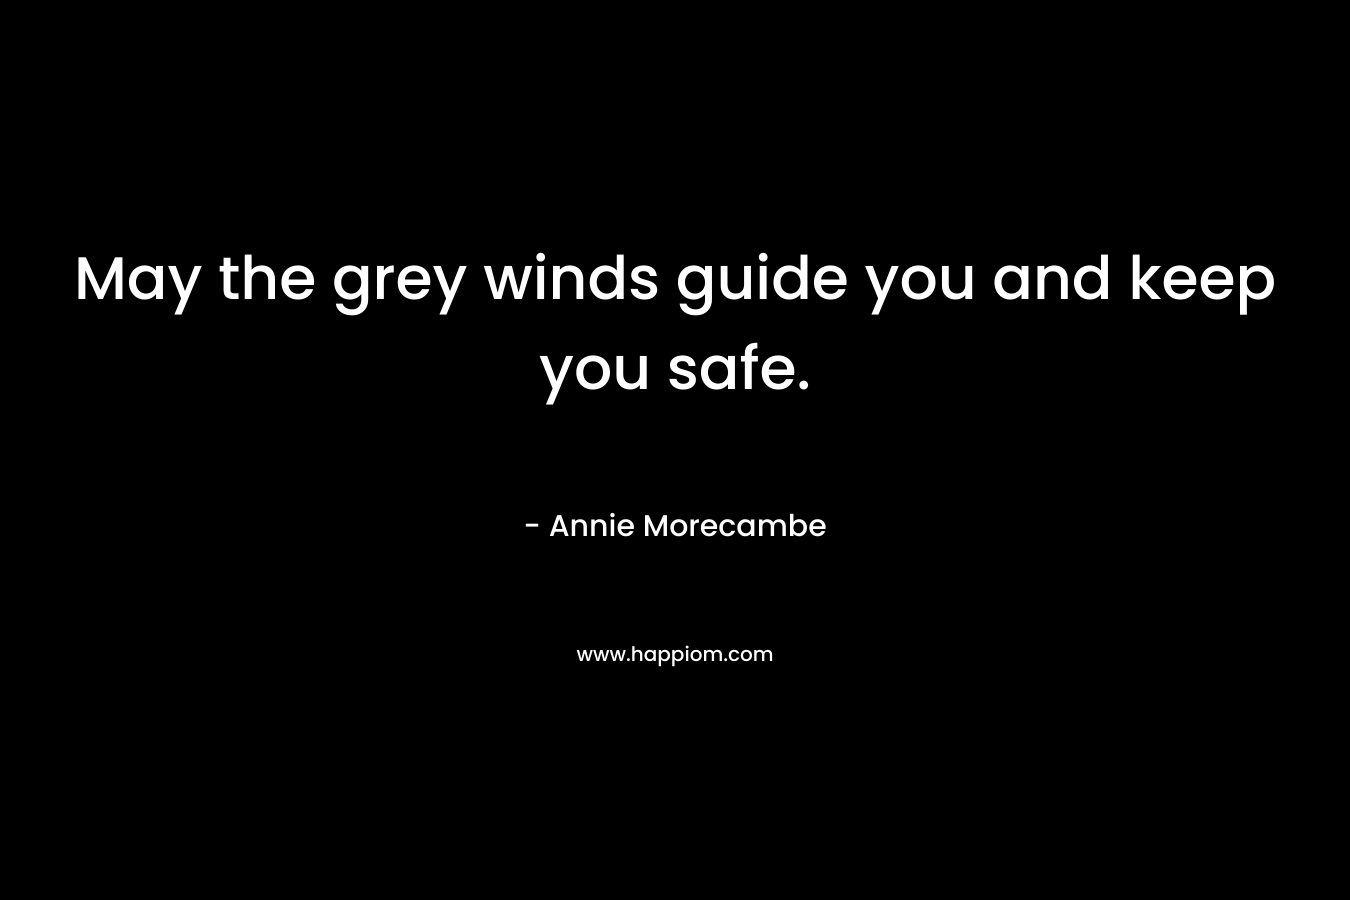 May the grey winds guide you and keep you safe.